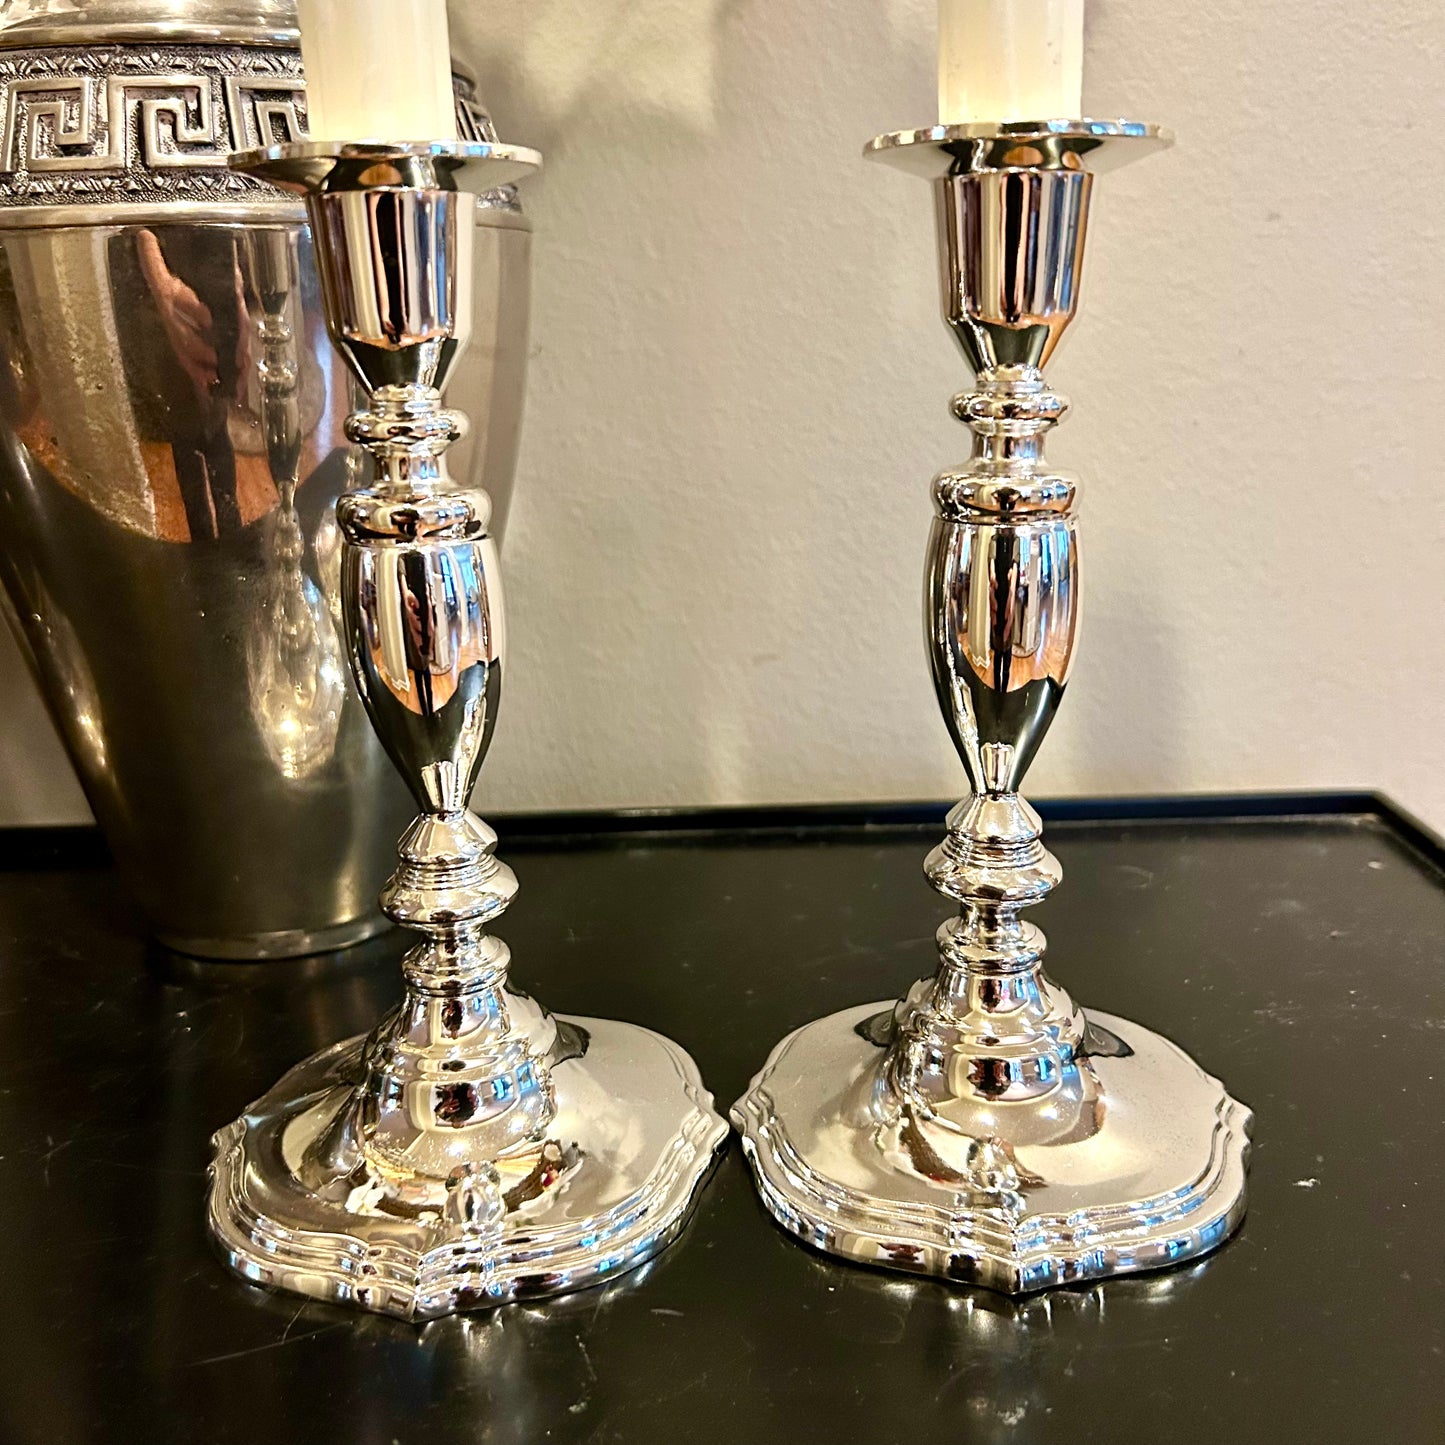 Pair of sparkling silver plate vintage candlestick holders